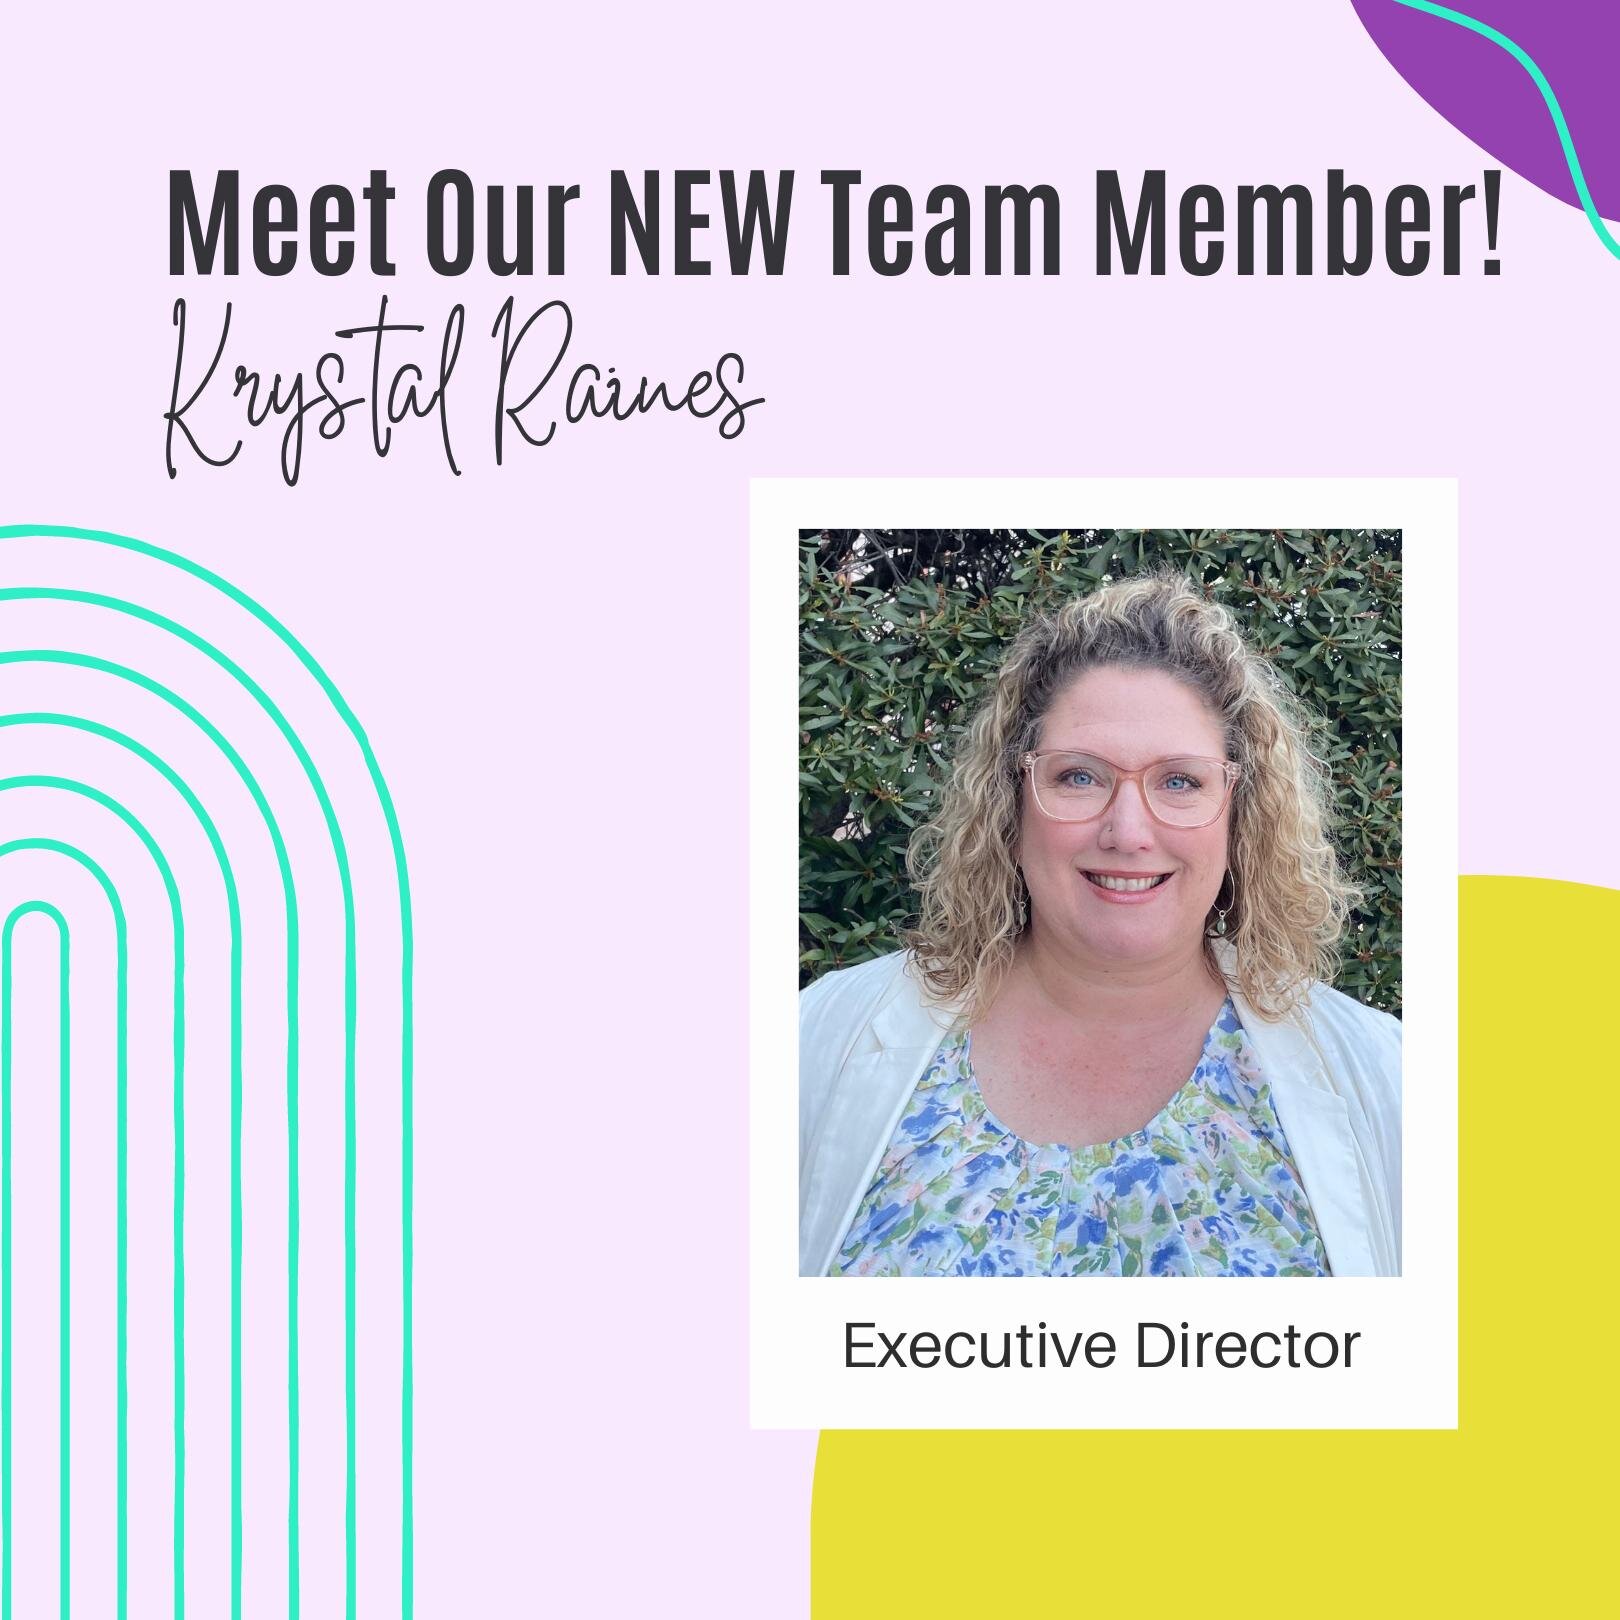 Meet Krystal, our new Executive Director! We are so excited to welcome her to our team as she leads Hospitality House for Women, Inc. forward in its mission to advocate, support and empower domestic violence survivors and their families 💜